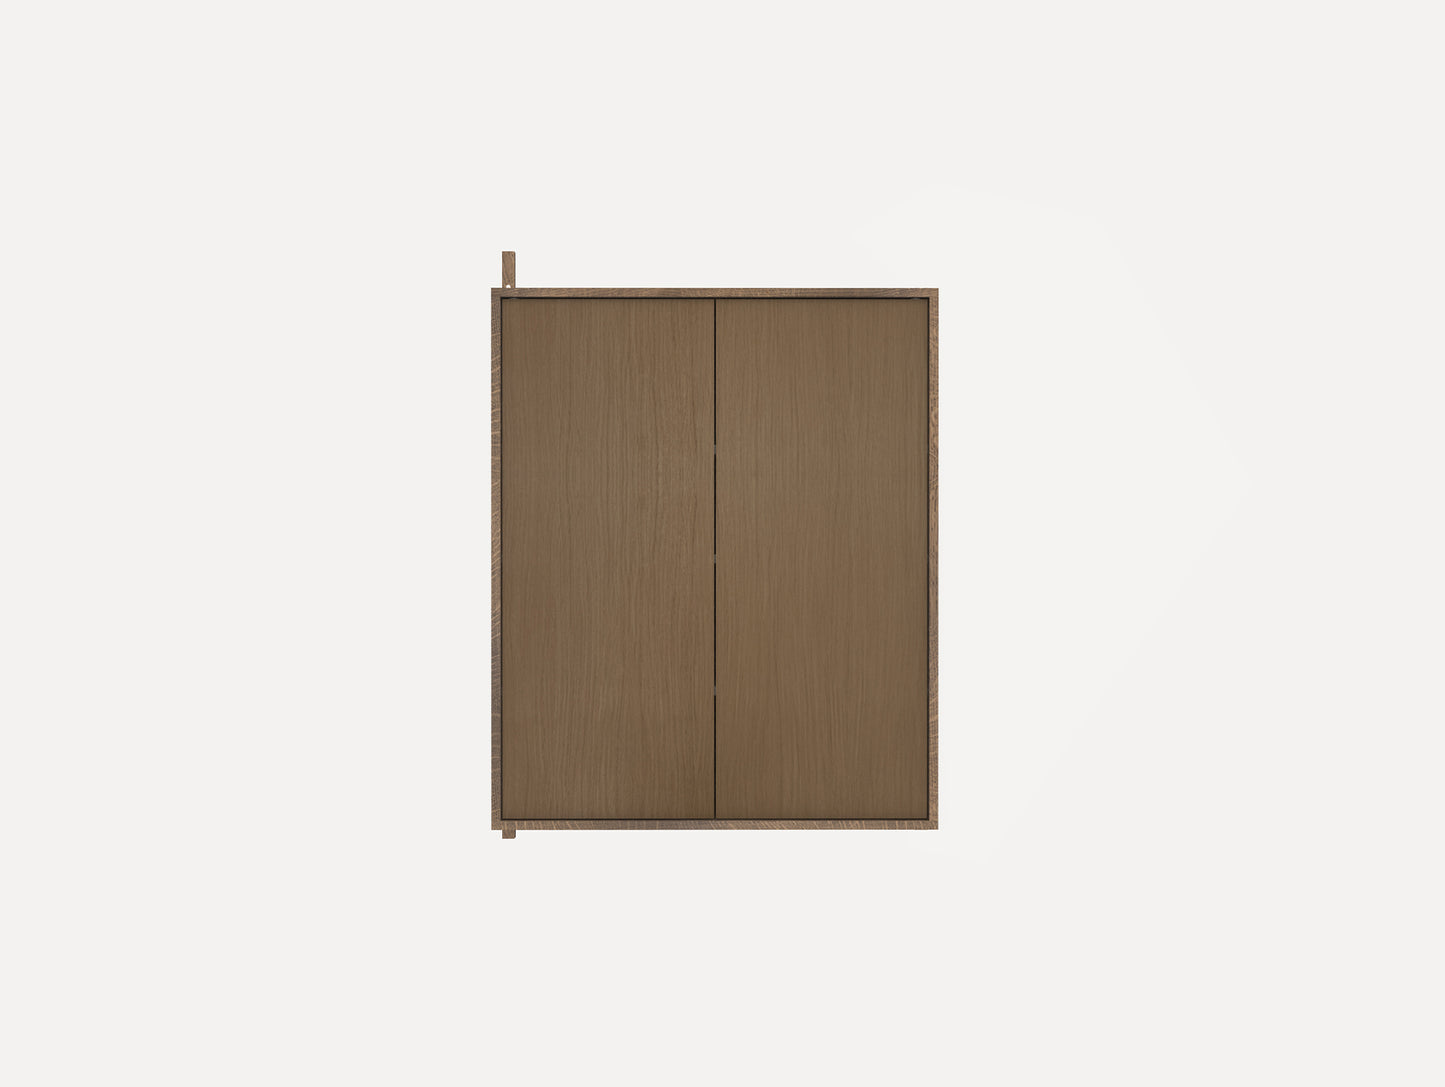 Shelf Library H1148 Cabinet Section Large Add-on in Dark Oiled Oak by Frama